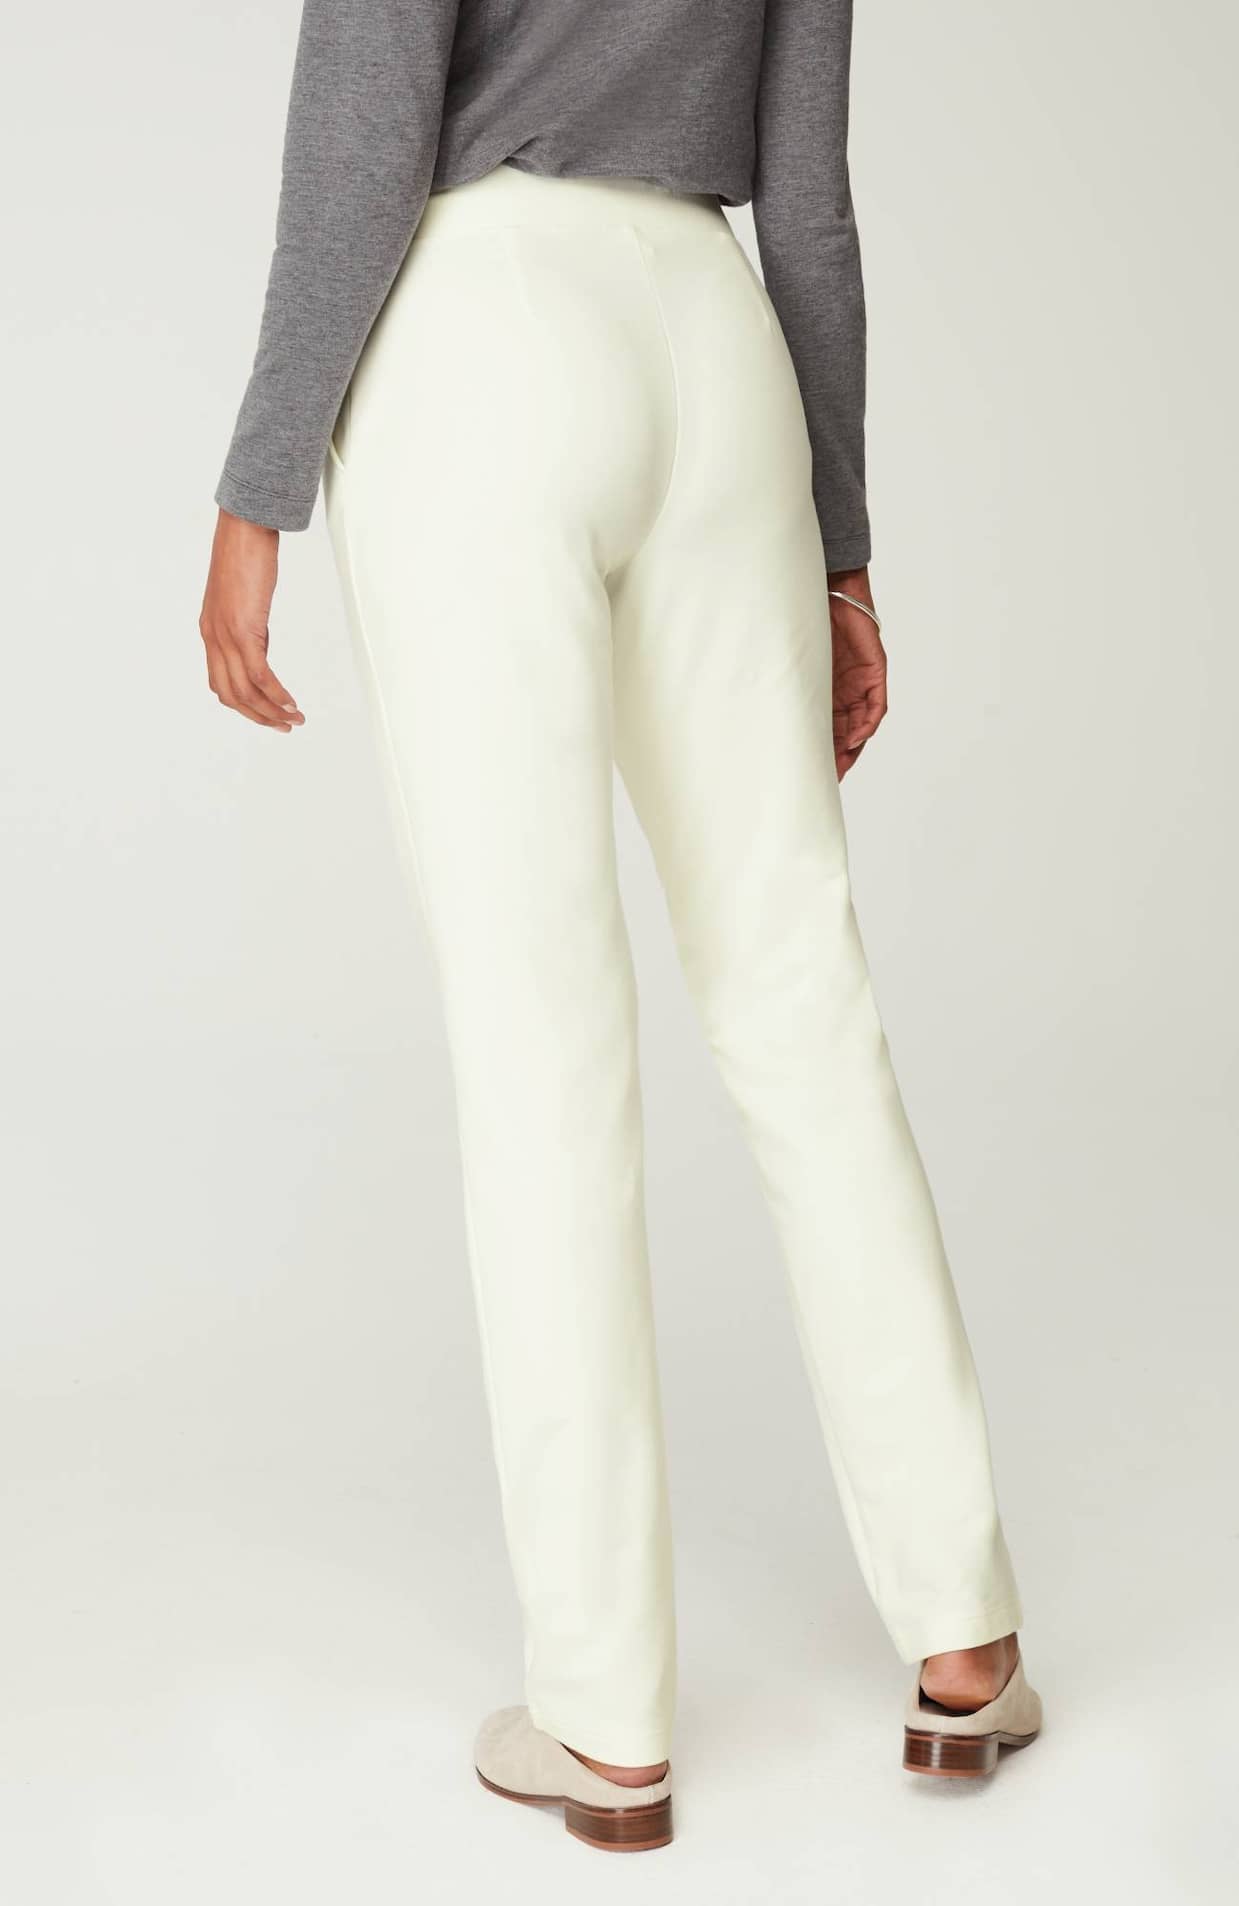 Pure Jill Affinity Slim-Leg Pants Size M - $50 New With Tags - From  Yulianasuleidy